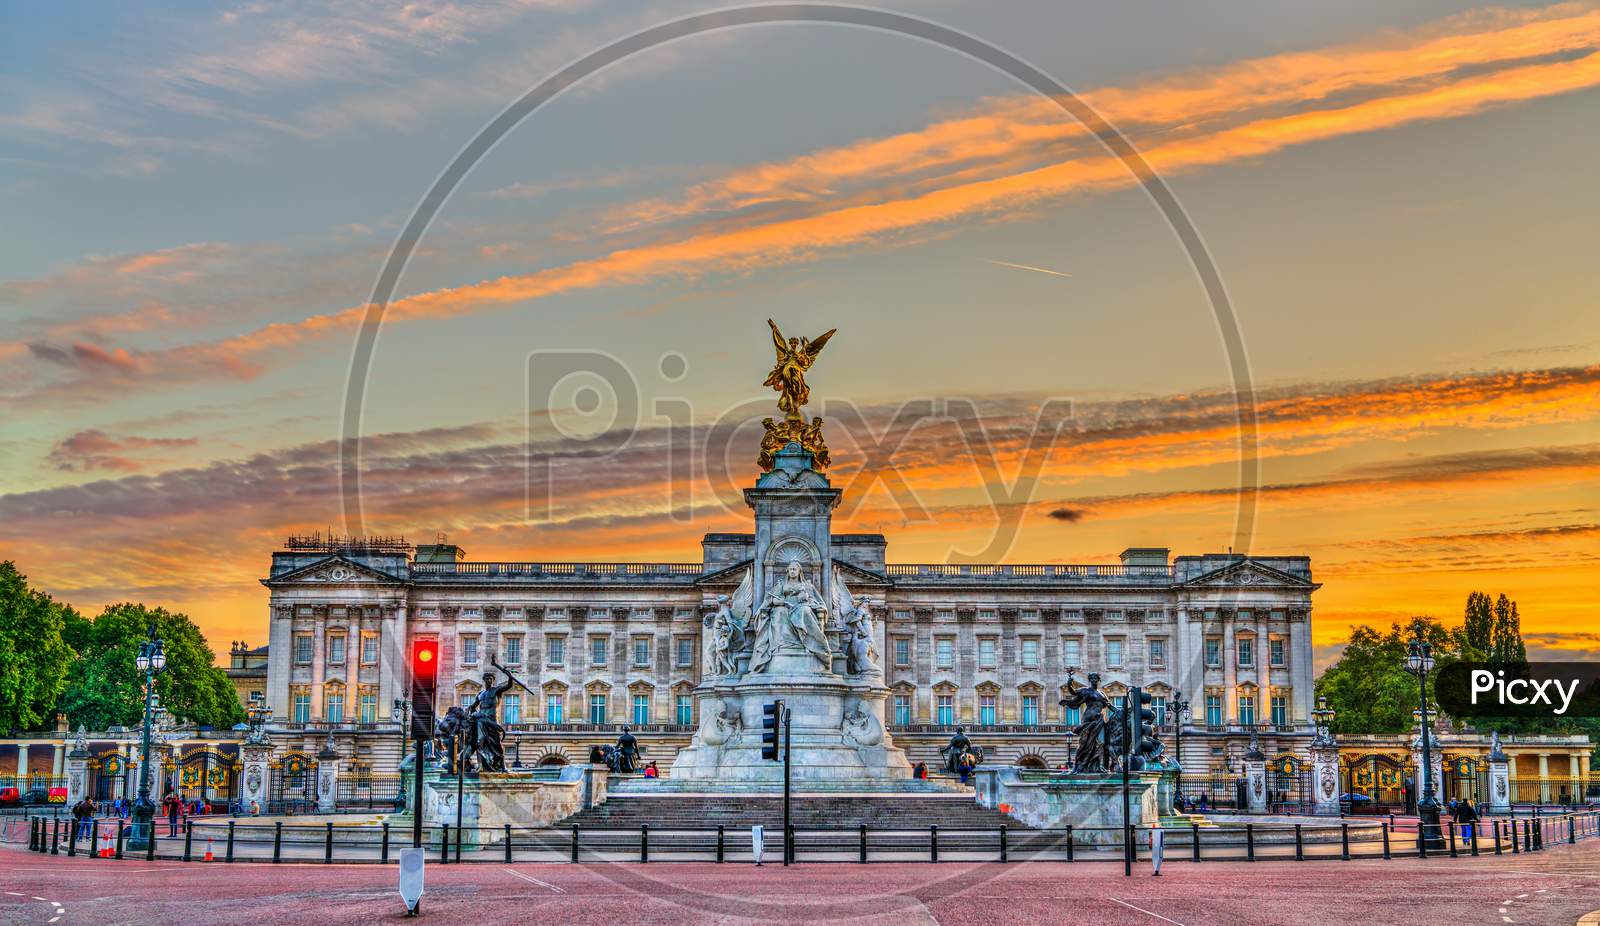 The Victoria Memorial And Buckingham Palace In London, England